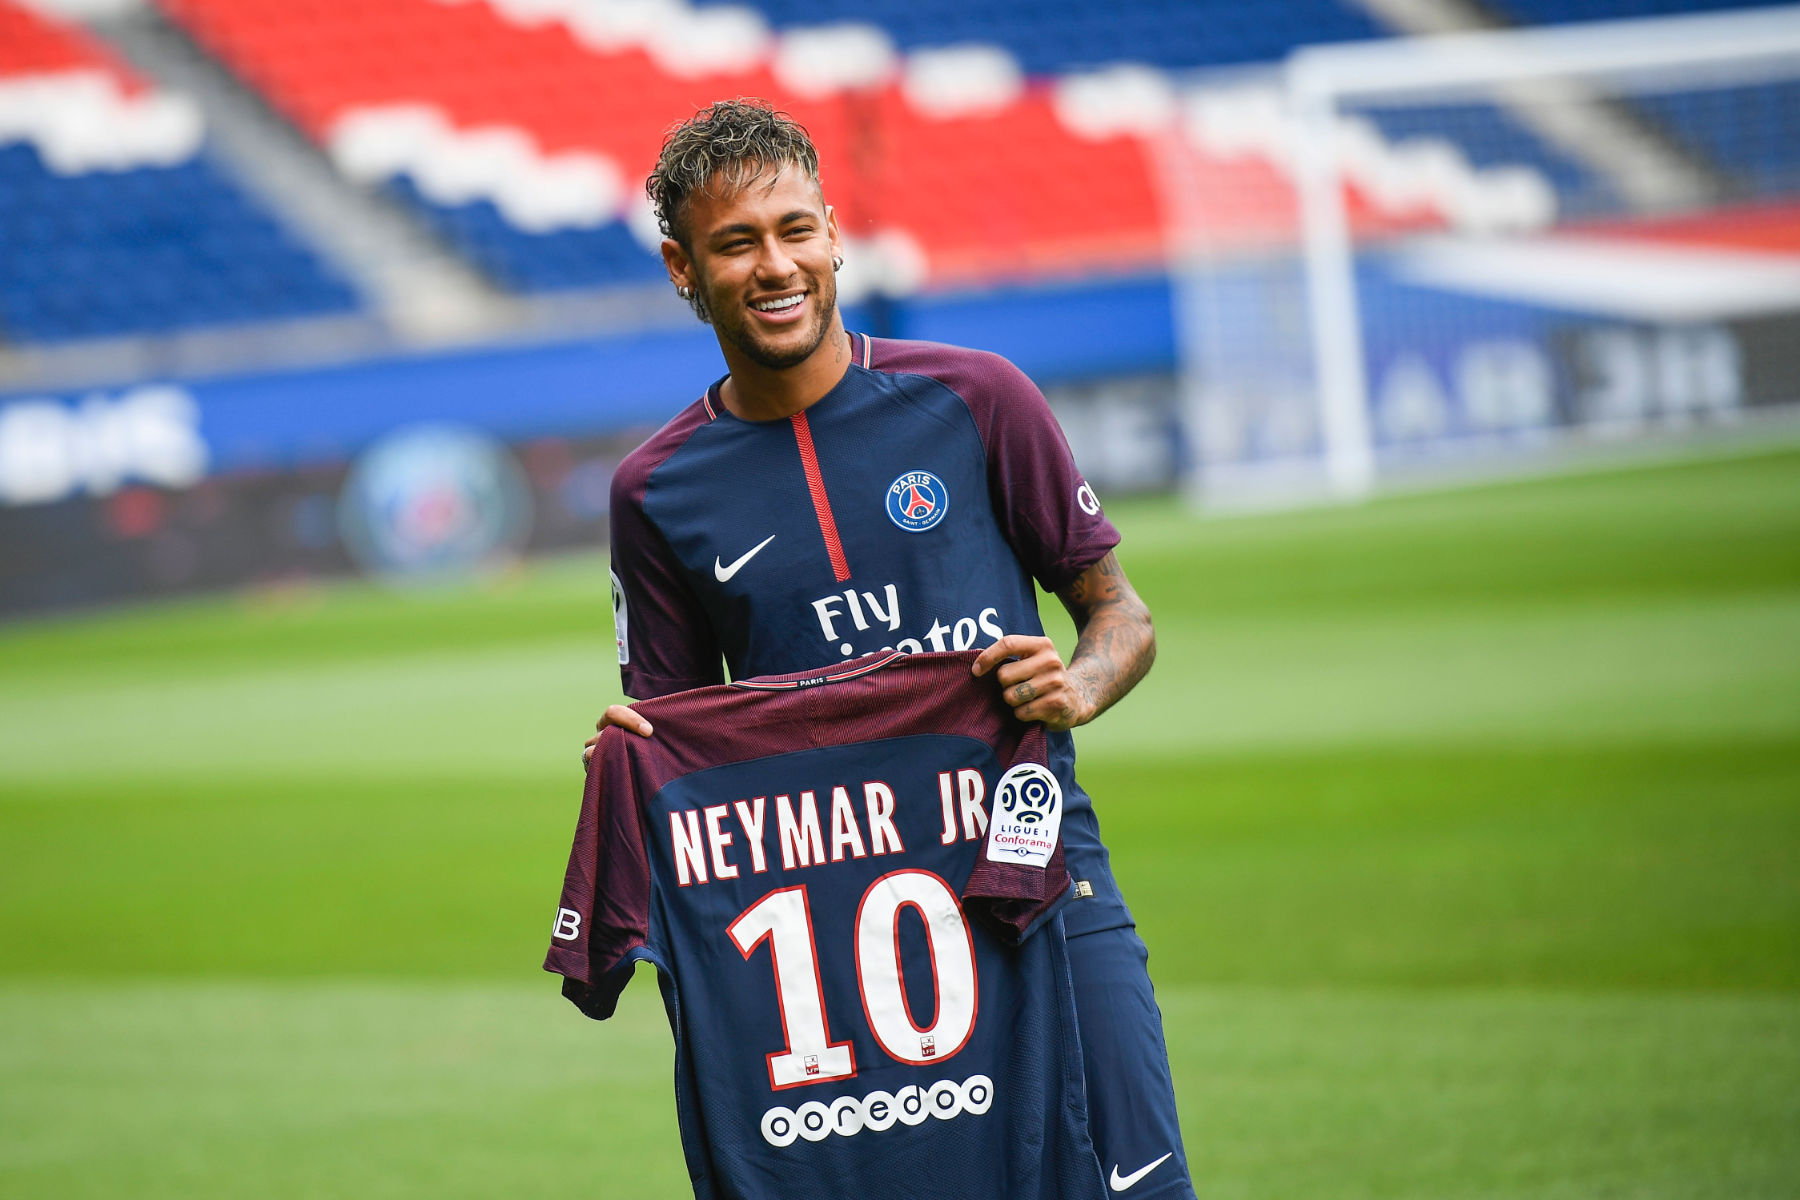 Neymar is PSG's Worst Transfer Since 2009 According to ESPN (Seriously